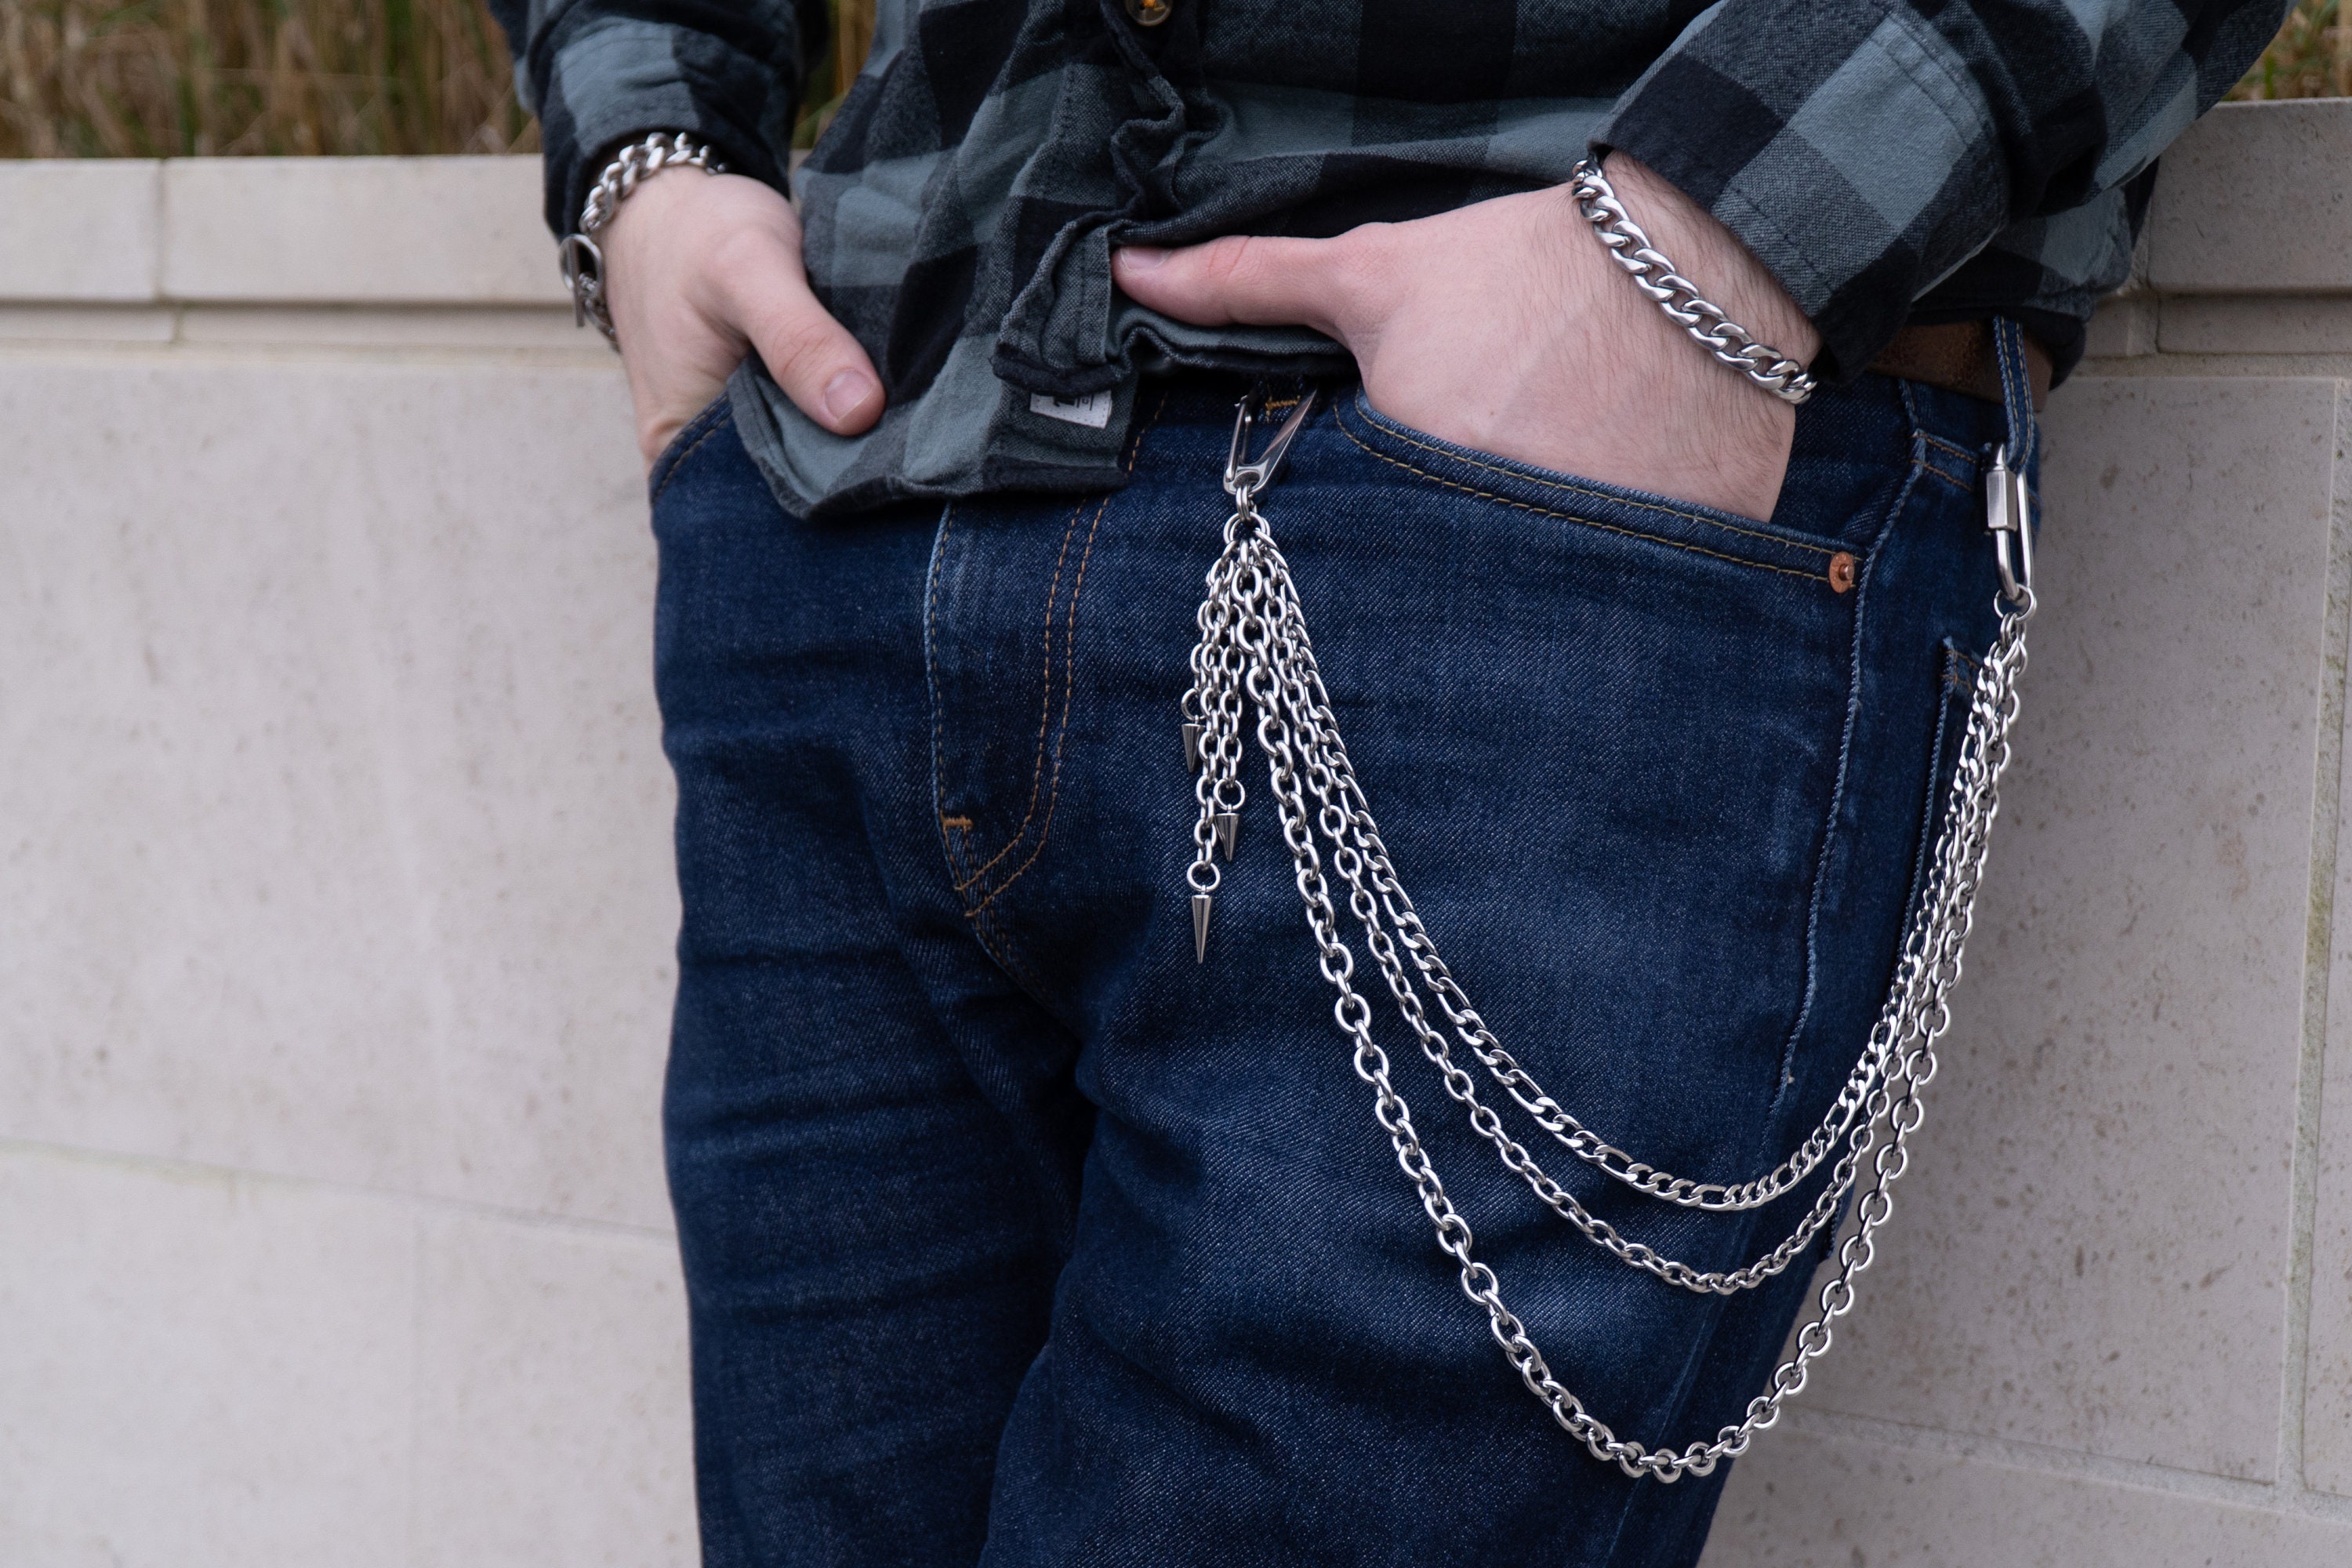 YEUHTLL Silver Pants Chains Cross Jeans Chains Pocket Punk Wallet Chain Not  Easy to Fade 